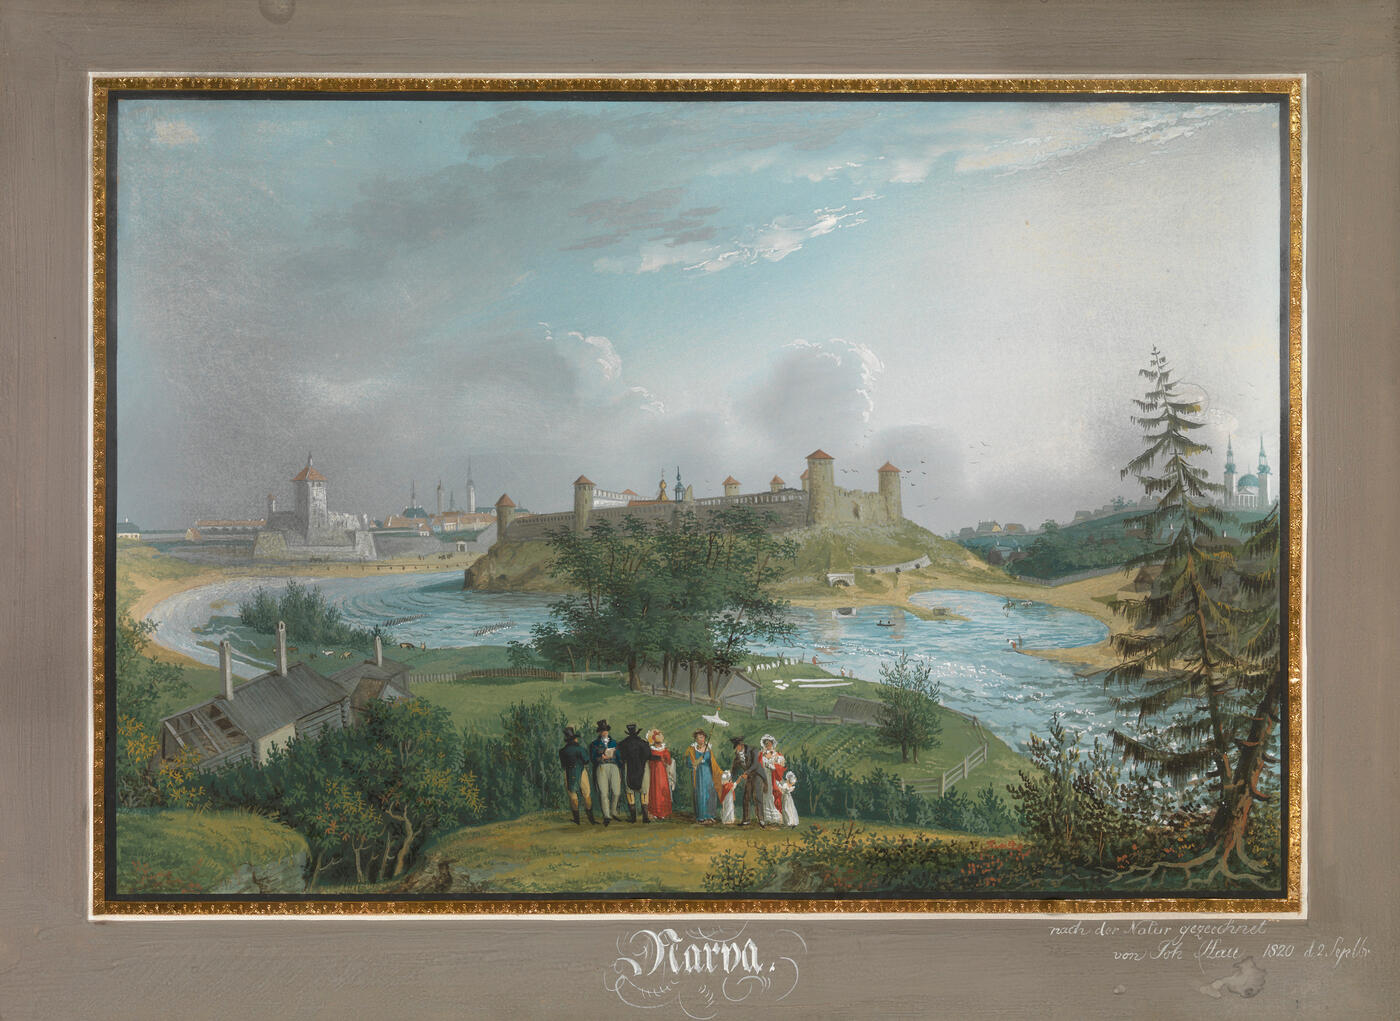 View of the Ivangorod Fortress from Narva